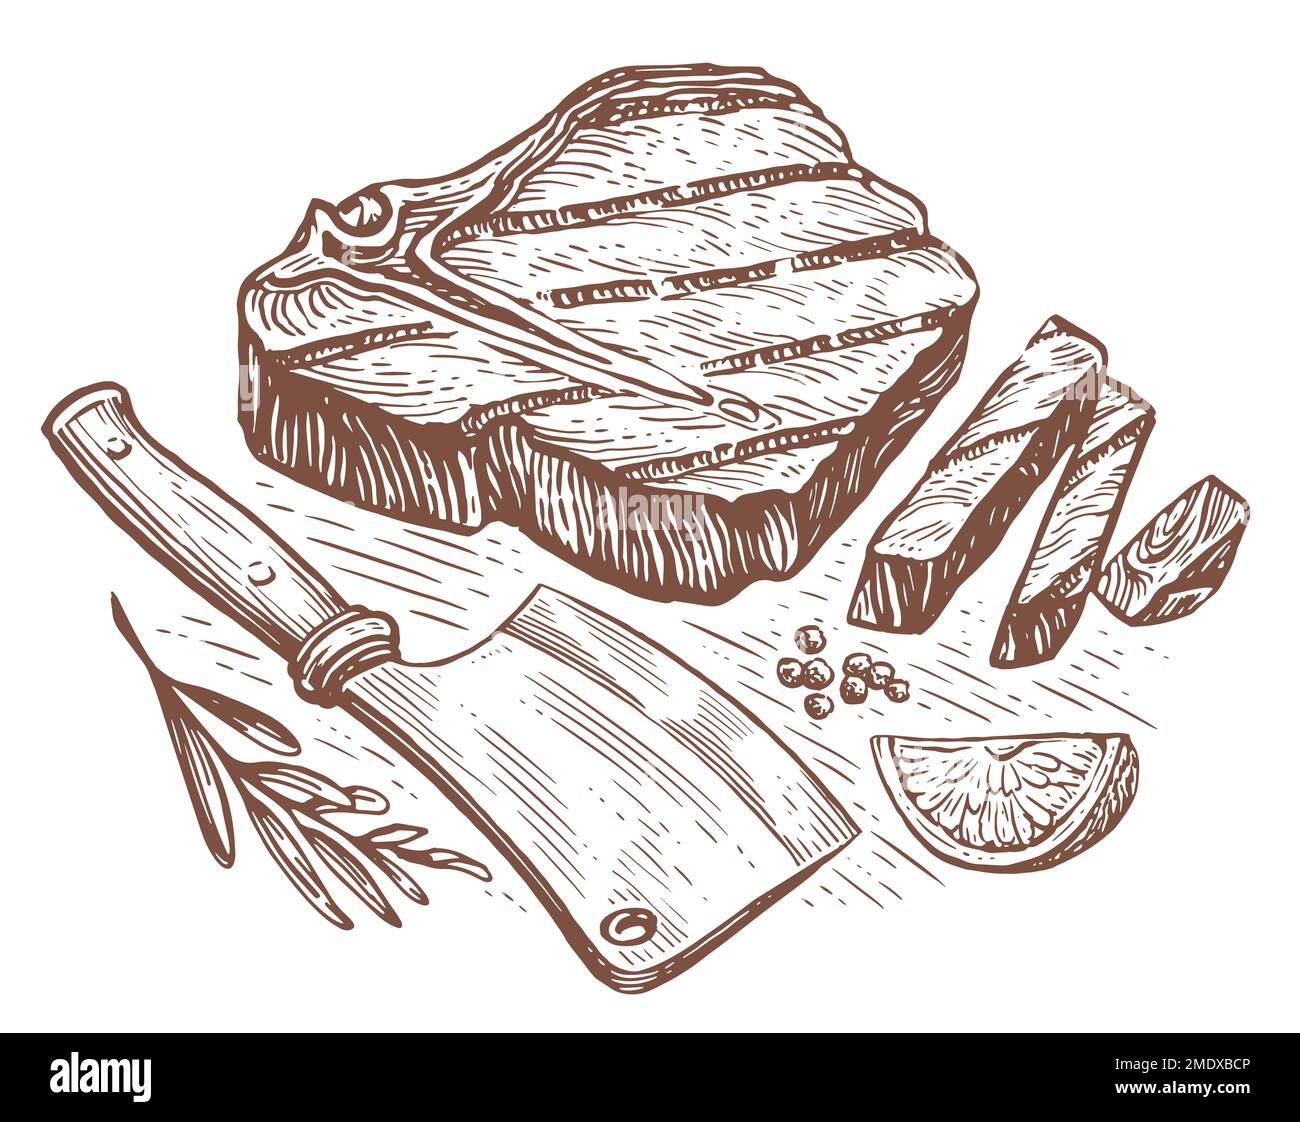 Grilled beef steak tenderloin and knife cleaver. Grill food, engraved sketch illustration Stock Photo